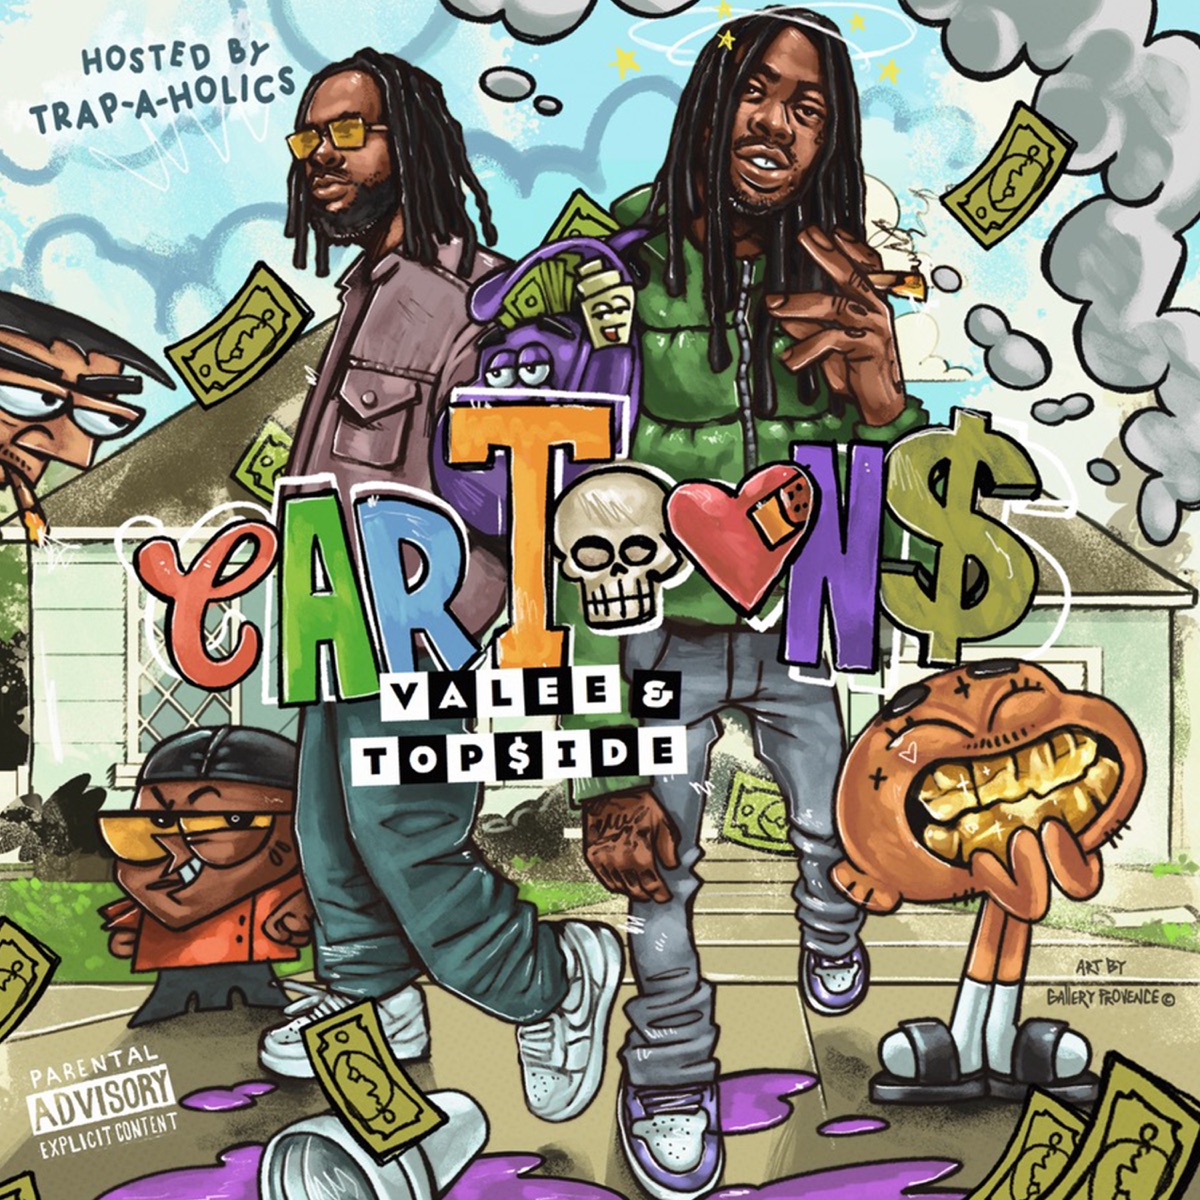 Valee, Top$ide & Trap-A-Holics – Beamer Truck